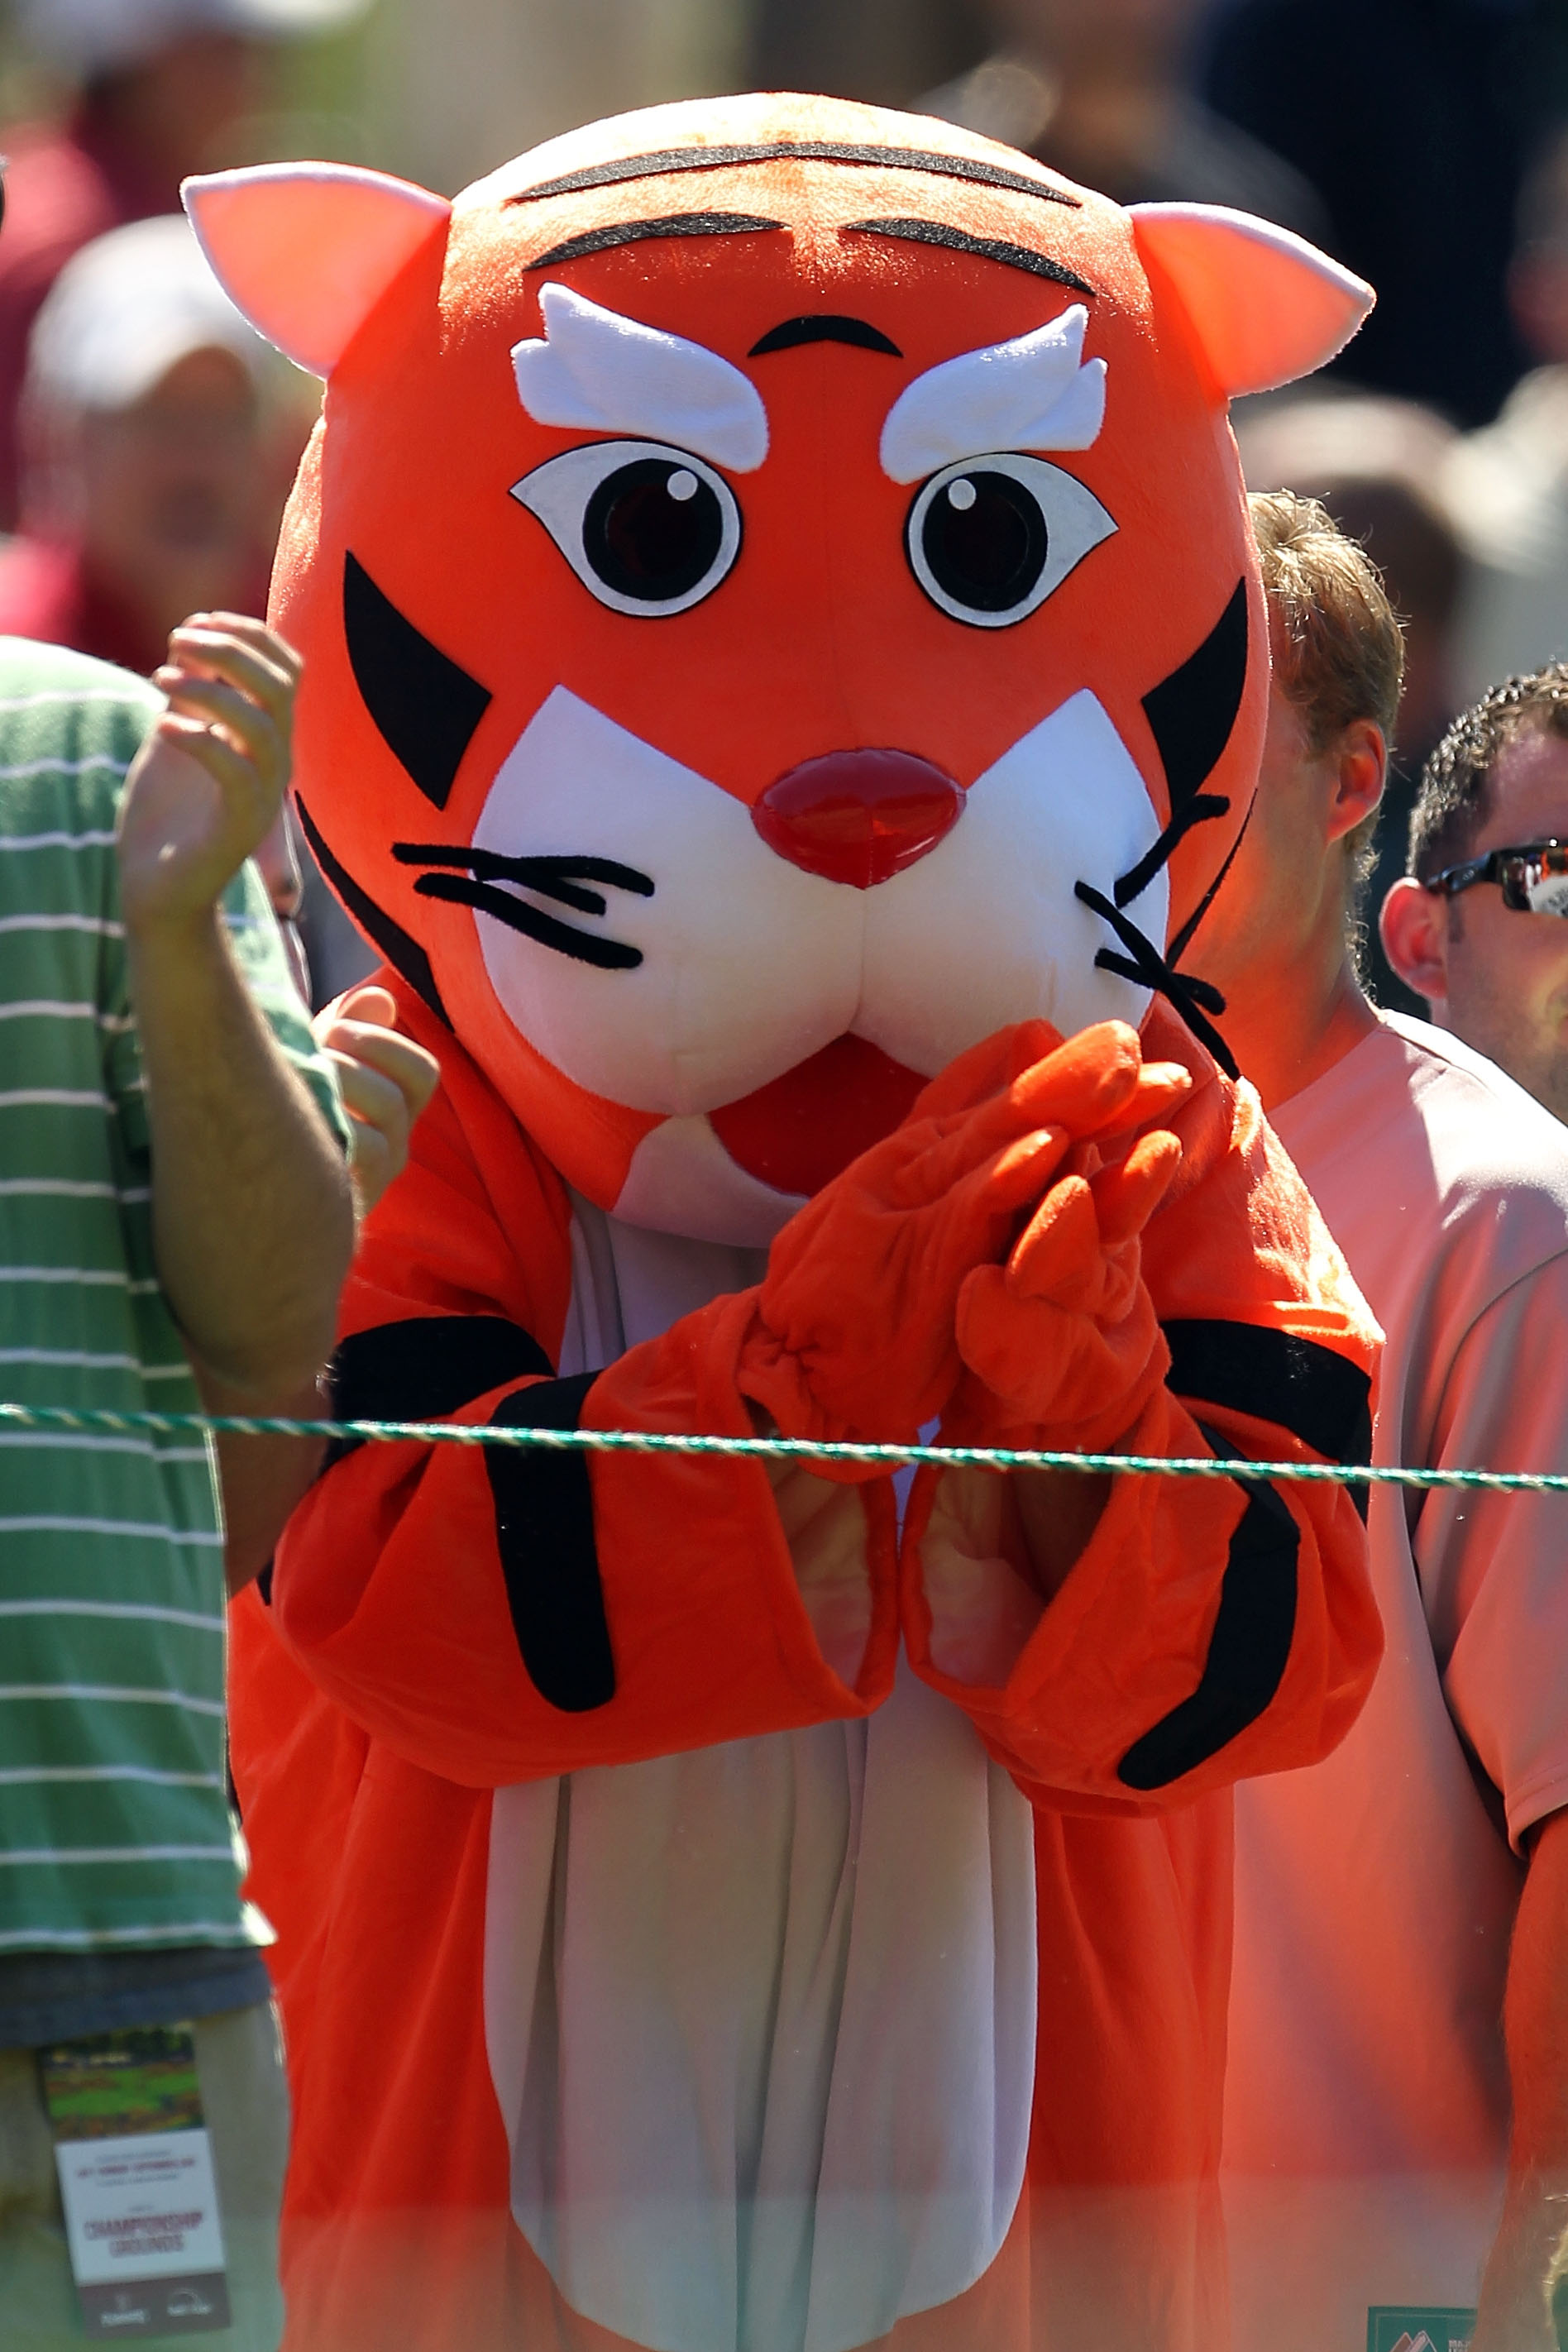 NORTON, MA - SEPTEMBER 06:  A spectator dresses in a tiger costume to watch Tiger Woods during the final round of the Deutsche Bank Championship at TPC Boston on September 6, 2010 in Norton, Massachusetts.  (Photo by Mike Ehrmann/Getty Images)